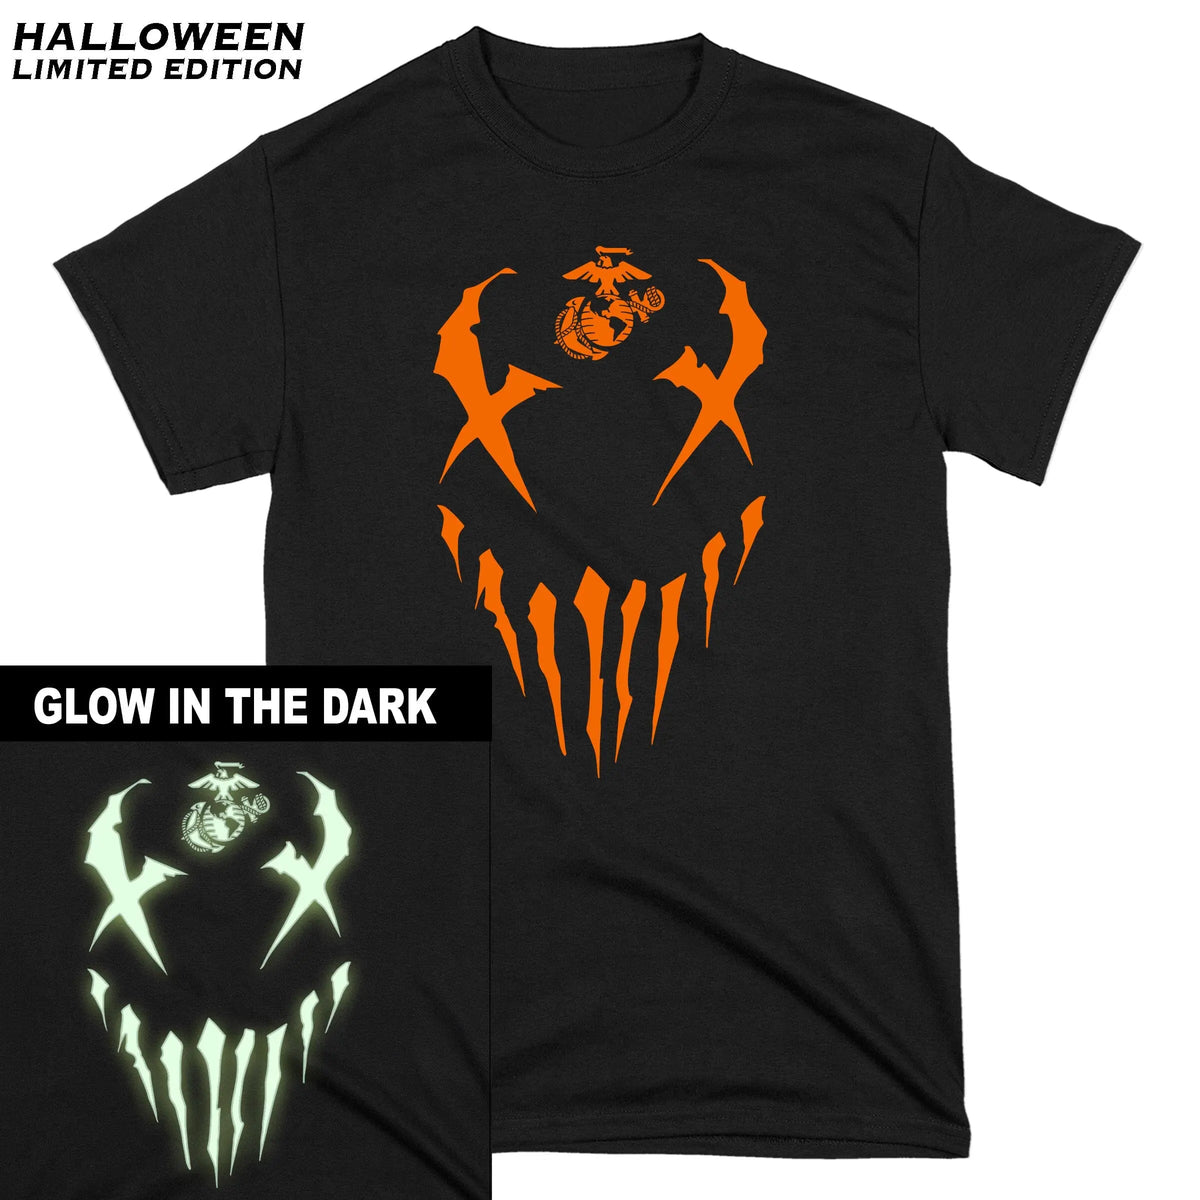 Limited Edition Glow In The Dark Halloween Marines T-Shirt